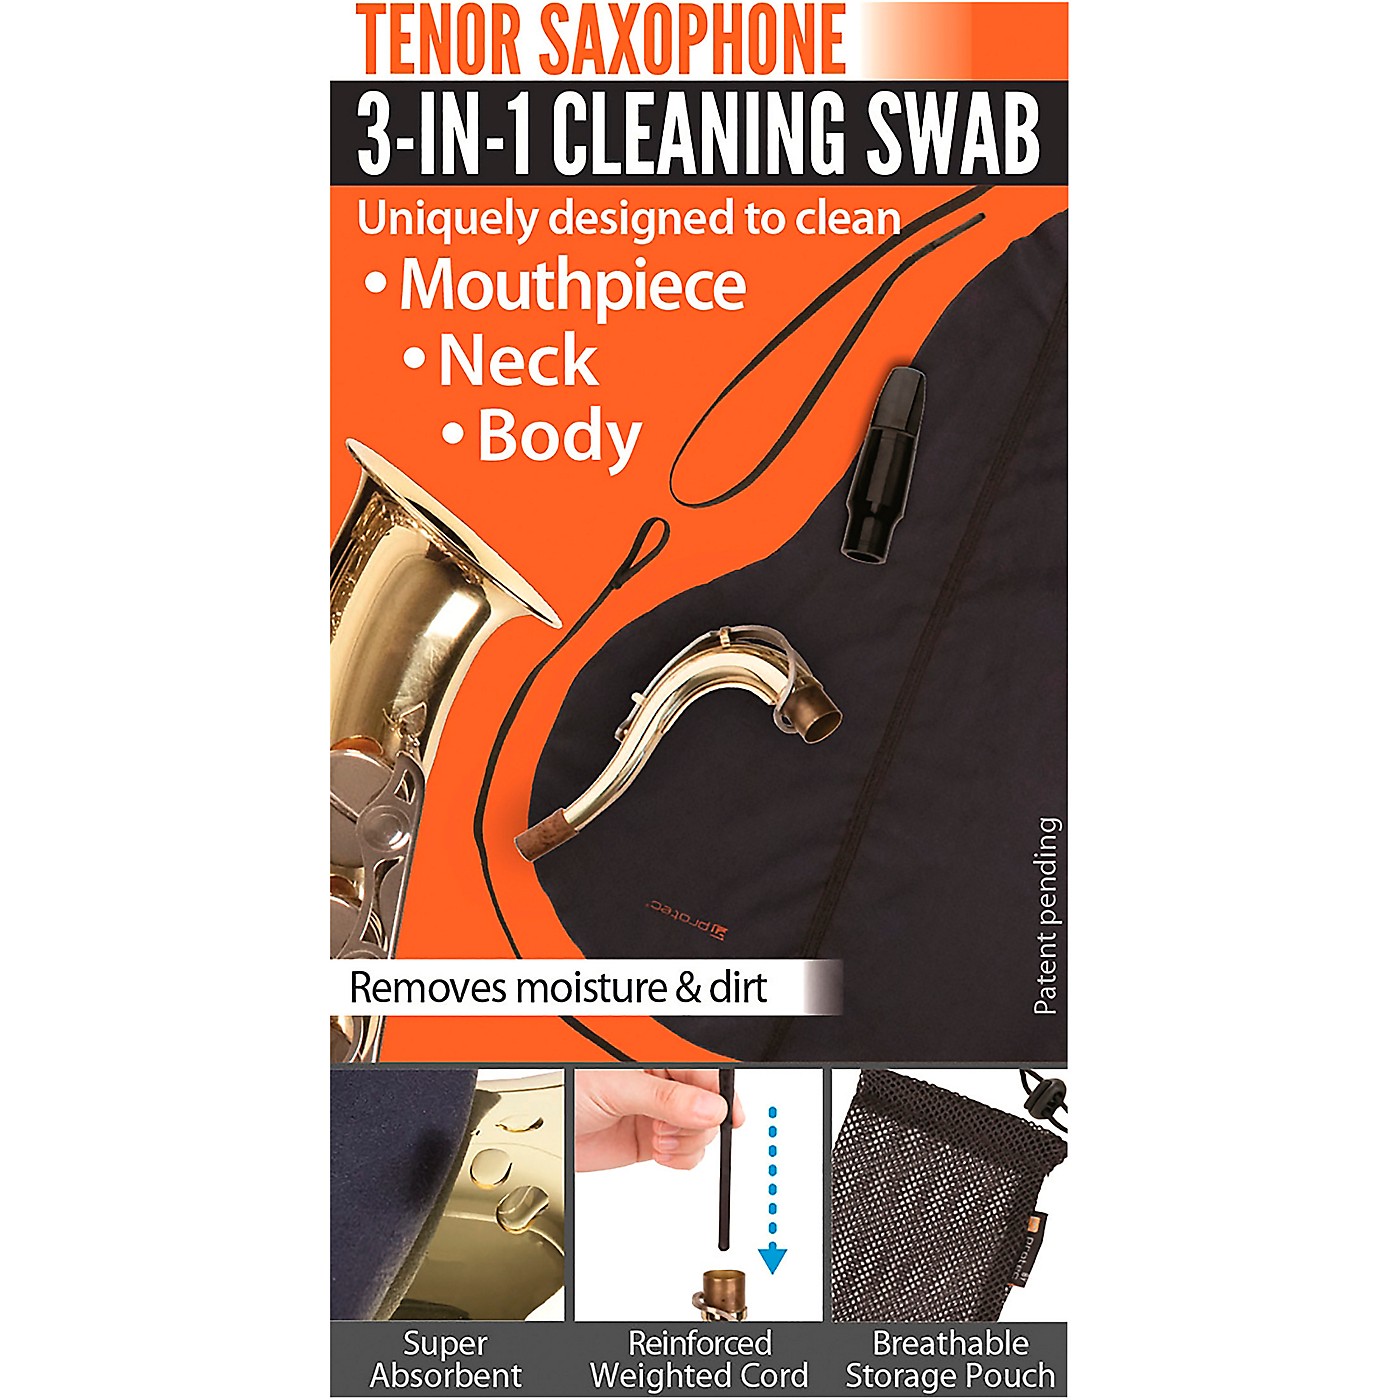 Protec 3-in-1 Tenor Saxophone Swab (Body, Neck, and Mouthpiece) thumbnail